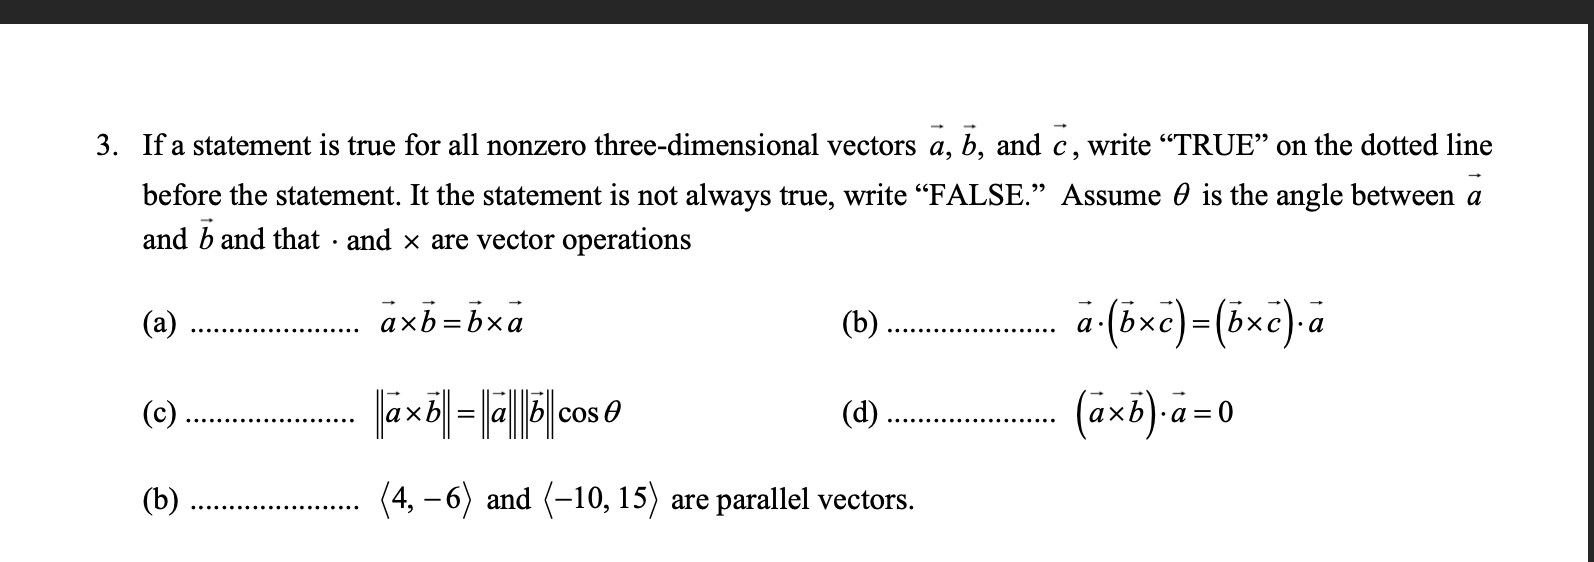 If a statement is true for all nonzero three-dimensional vectors a, b, and c, write "TRUE" on the dotted line
before the statement. It the statement is not always true, write “FALSE." Assume 0 is the angle between a
and b and that · and x are vector operations
(a)
axb=bxa
(b)
a (öxc)=(öxc). a
(d)
(axb)-a=0
(c)
cos O
(b)
(4, – 6) and (-10, 15) are parallel vectors.
|
